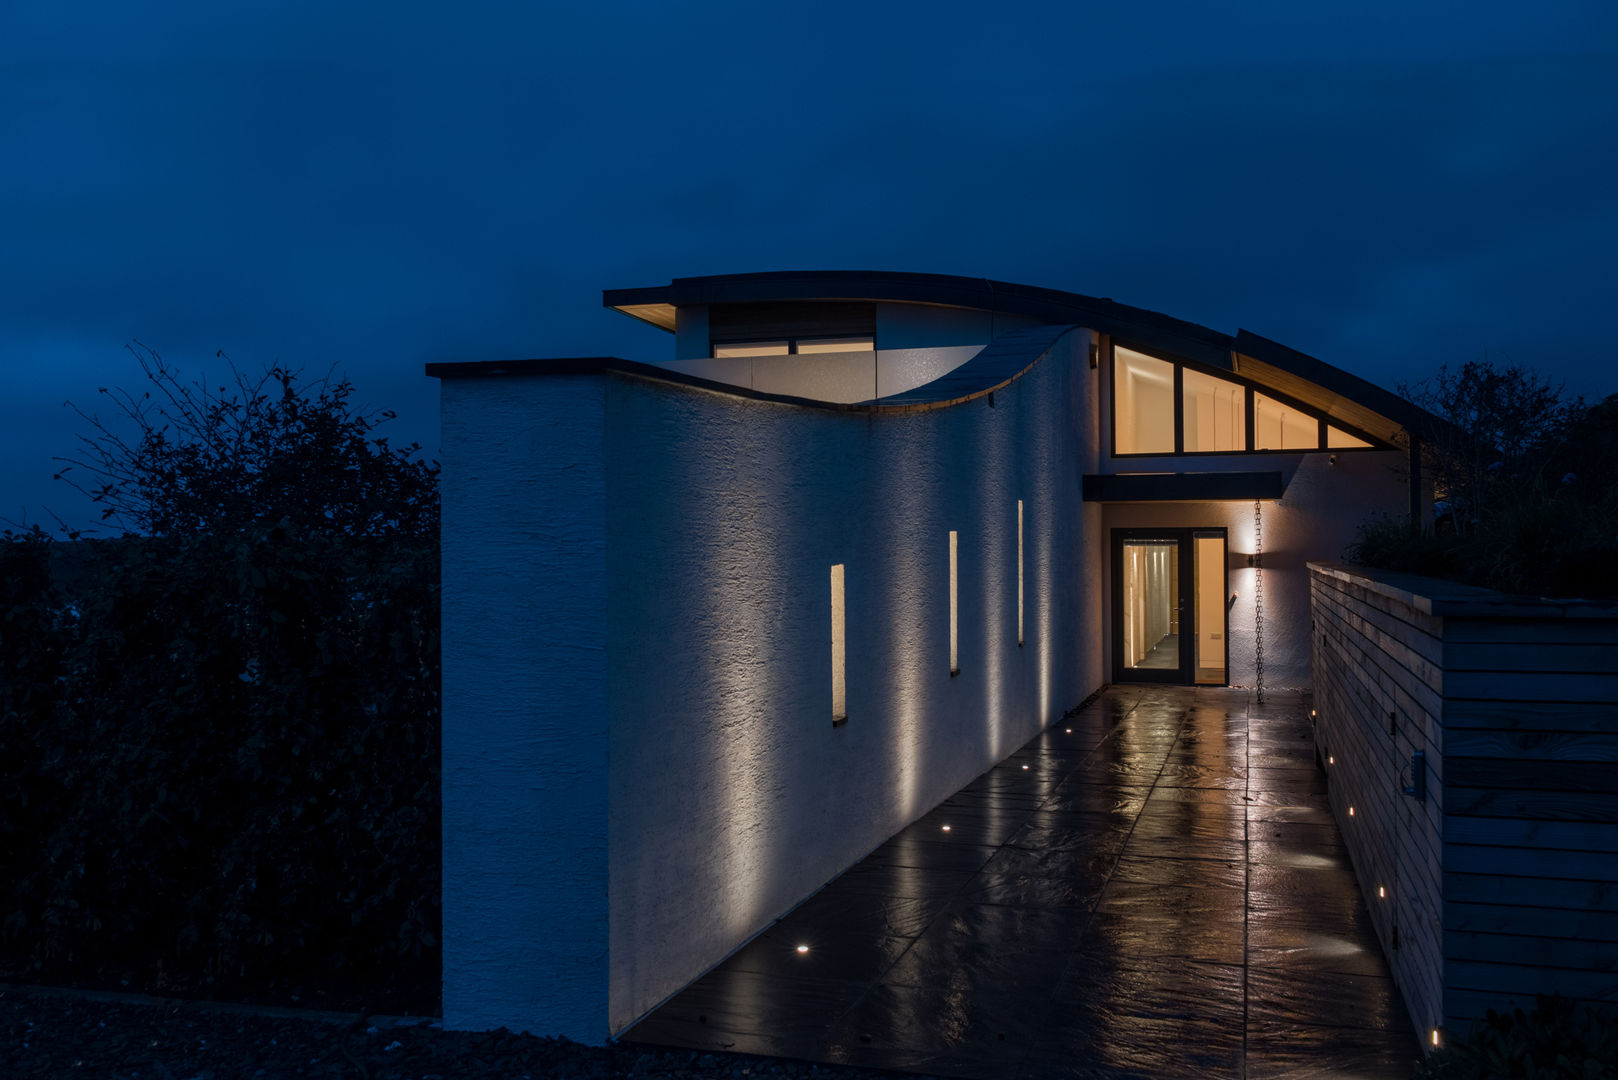 New Contemporary House, Polzeath, Cornwall Arco2 Architecture Ltd Modern houses Architects Cornwall, architecture Cornwall, arco2 architects, eco friendly architects, sustainable architects, sustainable architecture, architecture by the sea, beach house architecture,